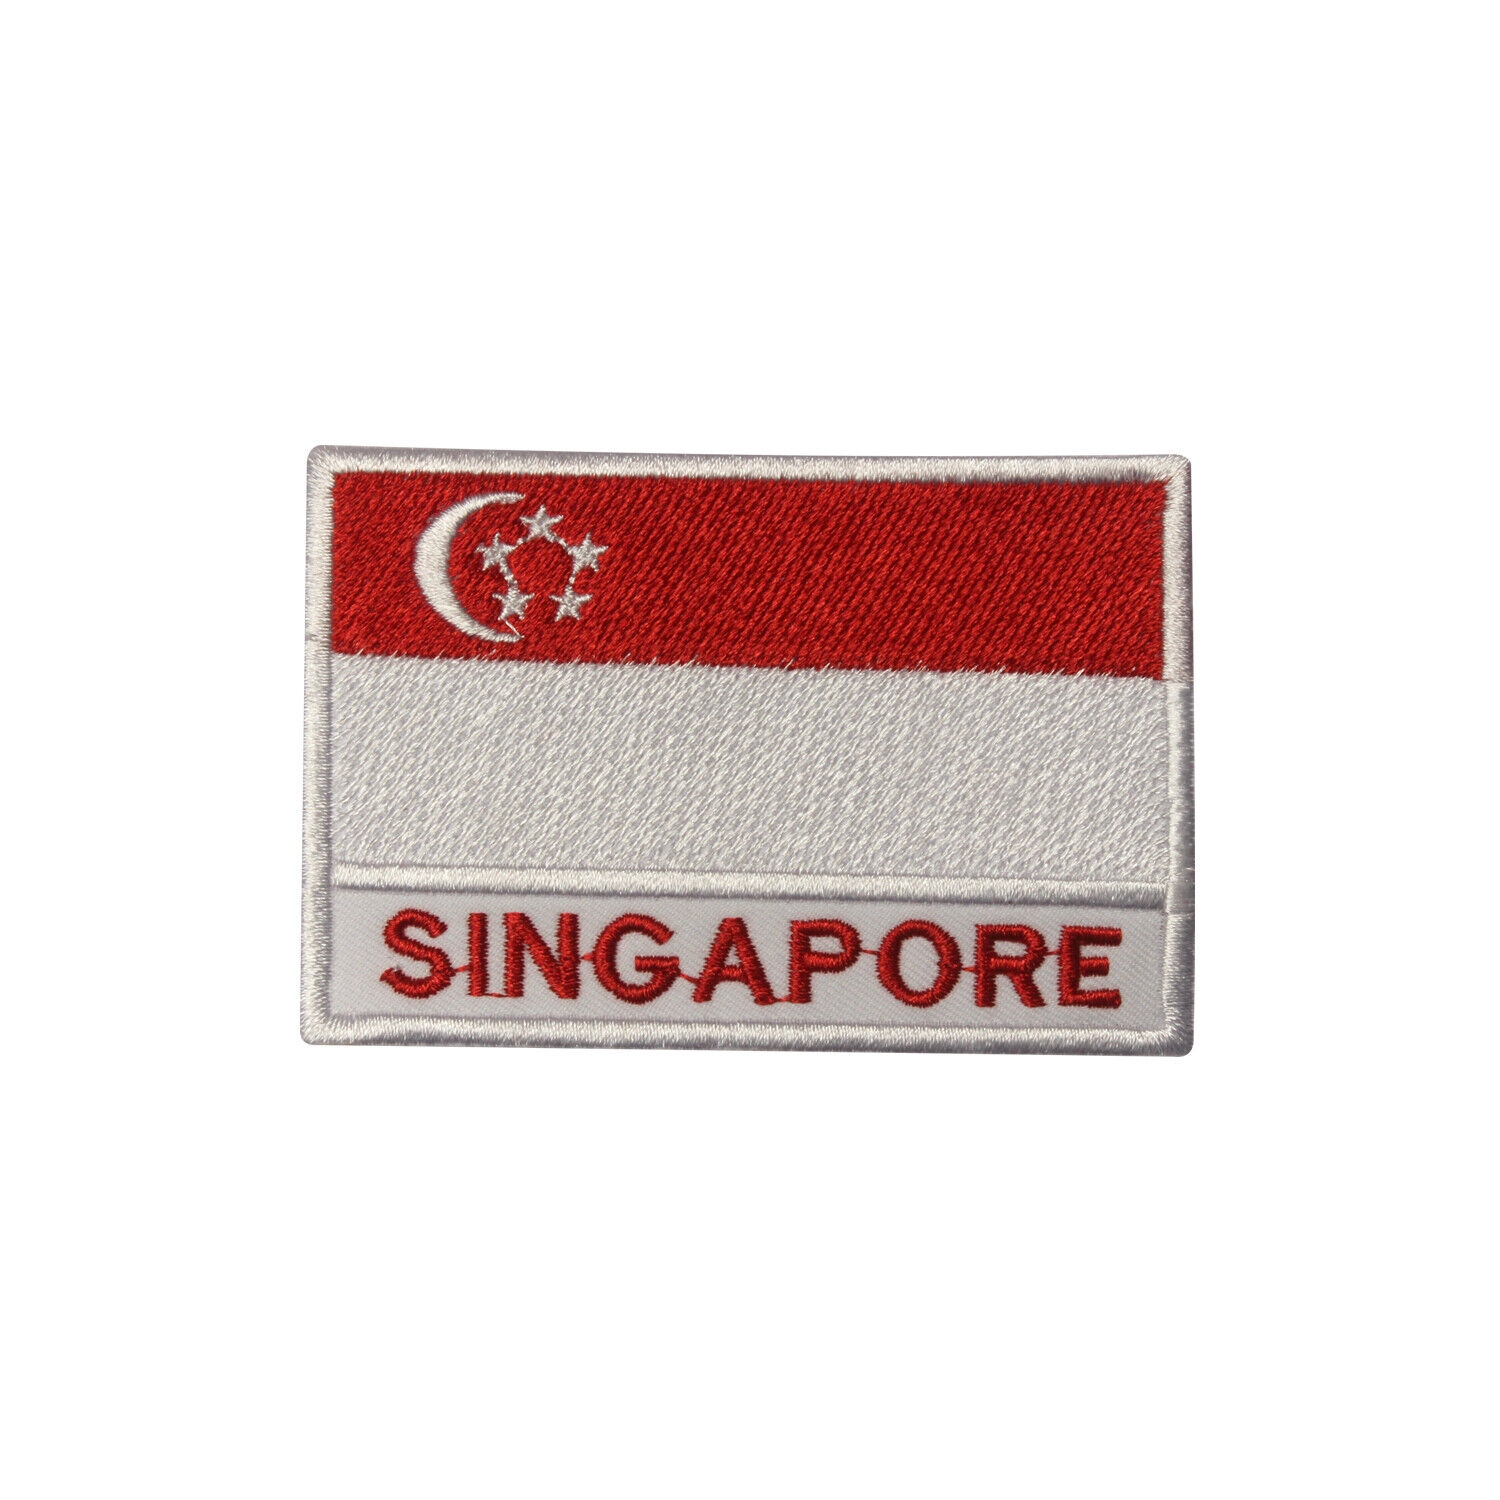 Singapore Country Flag Patch Iron On Patch Sew On Badge Embroidered Patch